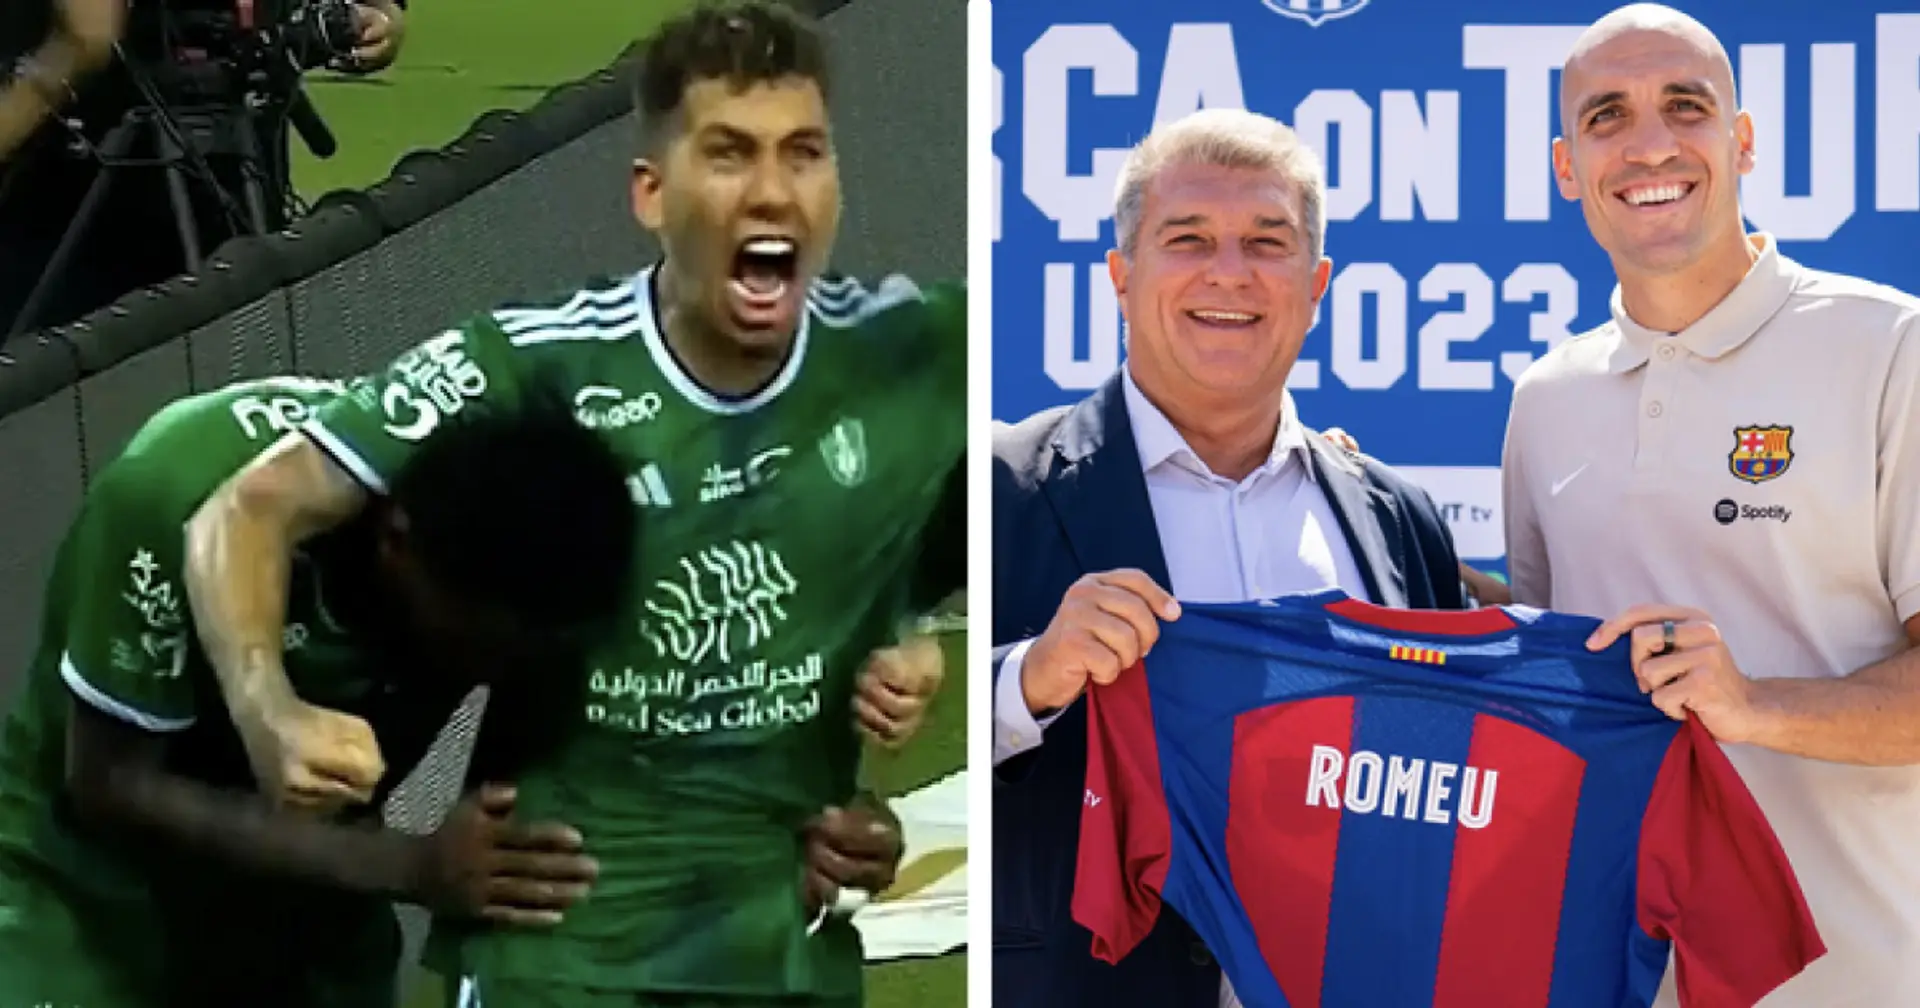 'Was it a mistake?': Fan wonders if Barca did wrong by selling one midfielder and buying Oriol Romeu instead